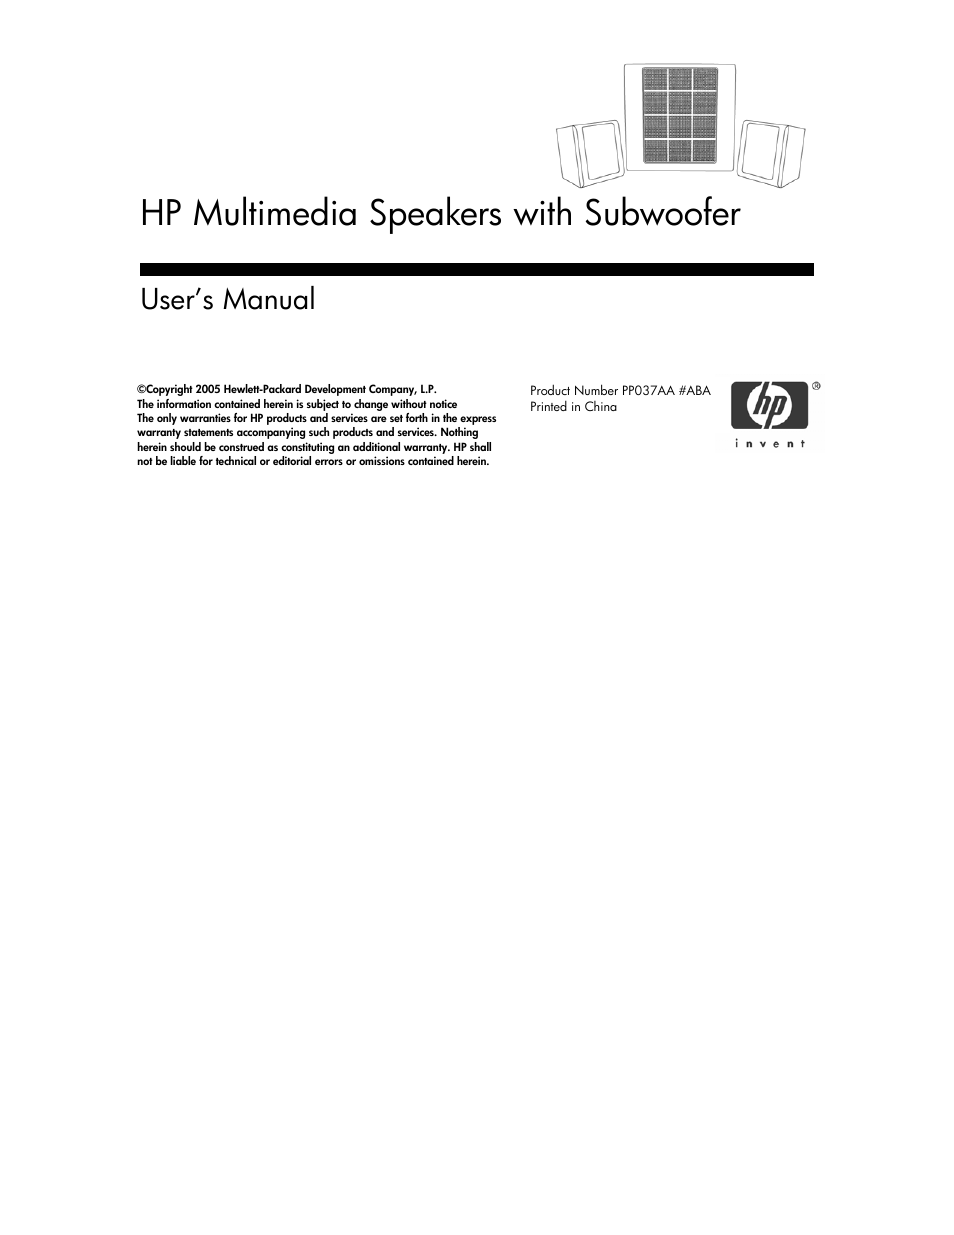 HP PP037AA #ABA User Manual | 11 pages